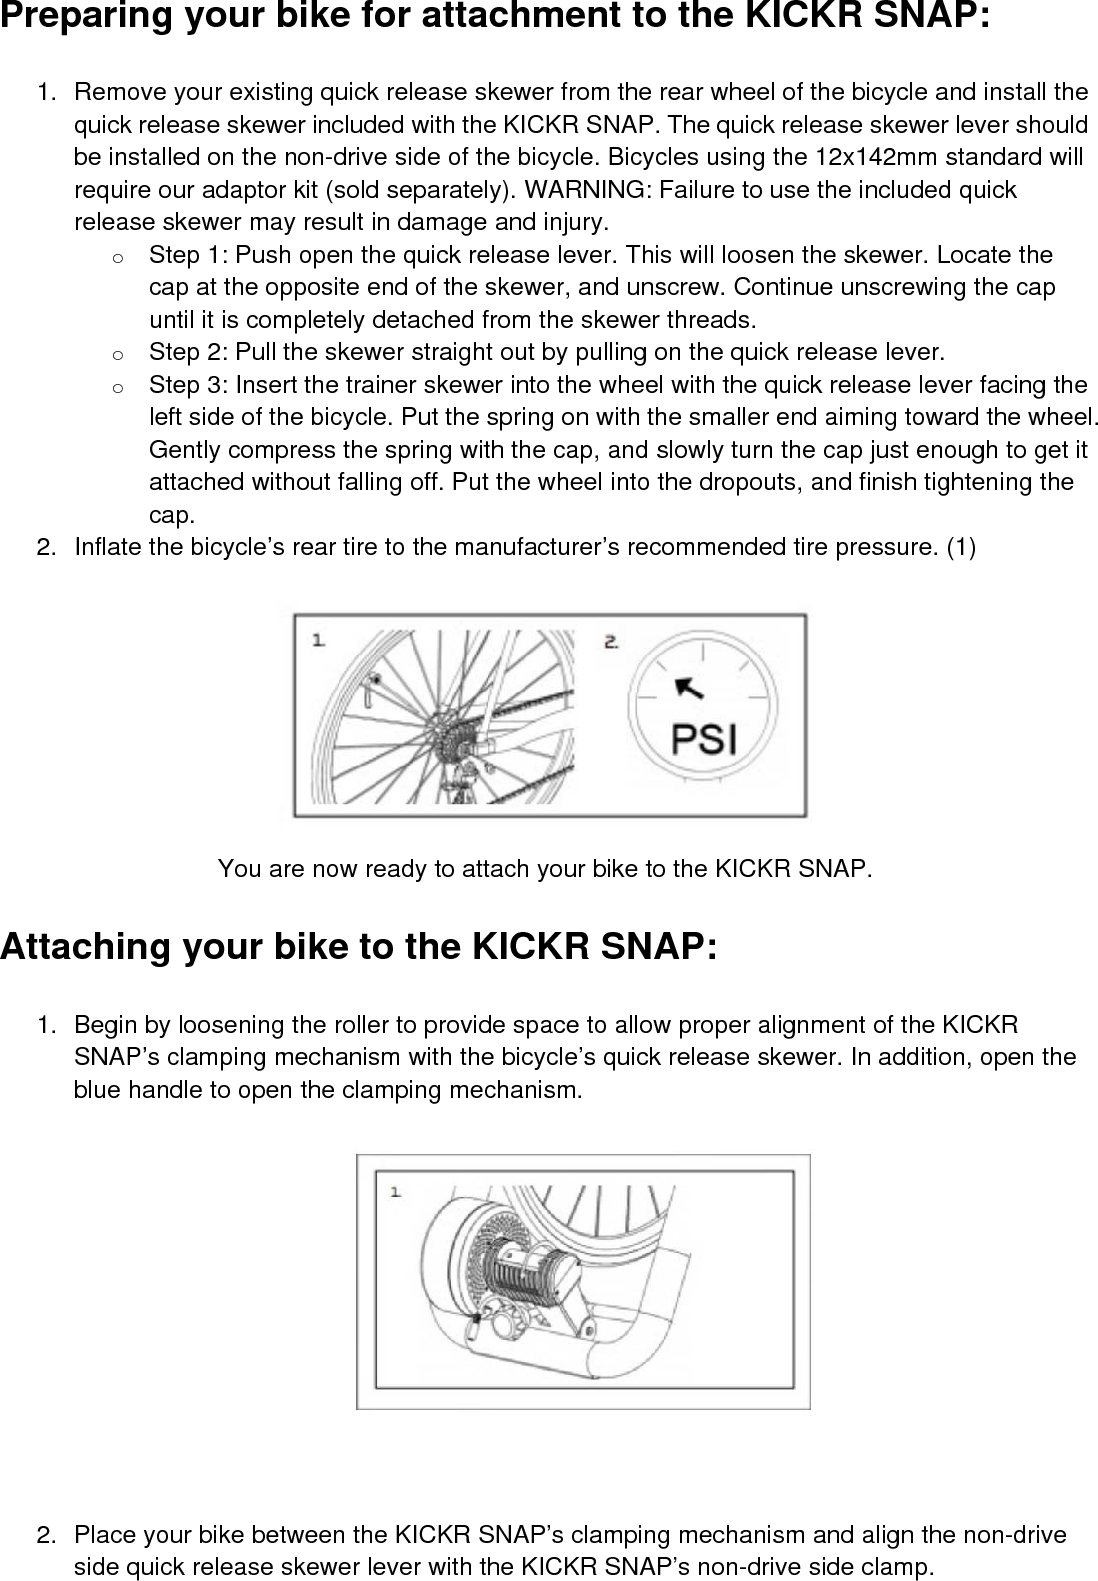 Preparing your bike for attachment to the KICKR SNAP:1. Remove your existing quick release skewer from the rear wheel of the bicycle and install thequick release skewer included with the KICKR SNAP. The quick release skewer lever shouldbe installed on the non-drive side of the bicycle. Bicycles using the 12x142mm standard willrequire our adaptor kit (sold separately). WARNING: Failure to use the included quickrelease skewer may result in damage and injury.oStep 1: Push open the quick release lever. This will loosen the skewer. Locate thecap at the opposite end of the skewer, and unscrew. Continue unscrewing the capuntil it is completely detached from the skewer threads.oStep 2: Pull the skewer straight out by pulling on the quick release lever.oStep 3: Insert the trainer skewer into the wheel with the quick release lever facing theleft side of the bicycle. Put the spring on with the smaller end aiming toward the wheel.Gently compress the spring with the cap, and slowly turn the cap just enough to get itattached without falling off. Put the wheel into the dropouts, and finish tightening thecap.2. Inflate the bicycle’s rear tire to the manufacturer’s recommended tire pressure. (1)You are now ready to attach your bike to the KICKR SNAP.Attaching your bike to the KICKR SNAP:1. Begin by loosening the roller to provide space to allow proper alignment of the KICKRSNAP’s clamping mechanism with the bicycle’s quick release skewer. In addition, open theblue handle to open the clamping mechanism.2. Place your bike between the KICKR SNAP’s clamping mechanism and align the non-driveside quick release skewer lever with the KICKR SNAP’s non-drive side clamp.